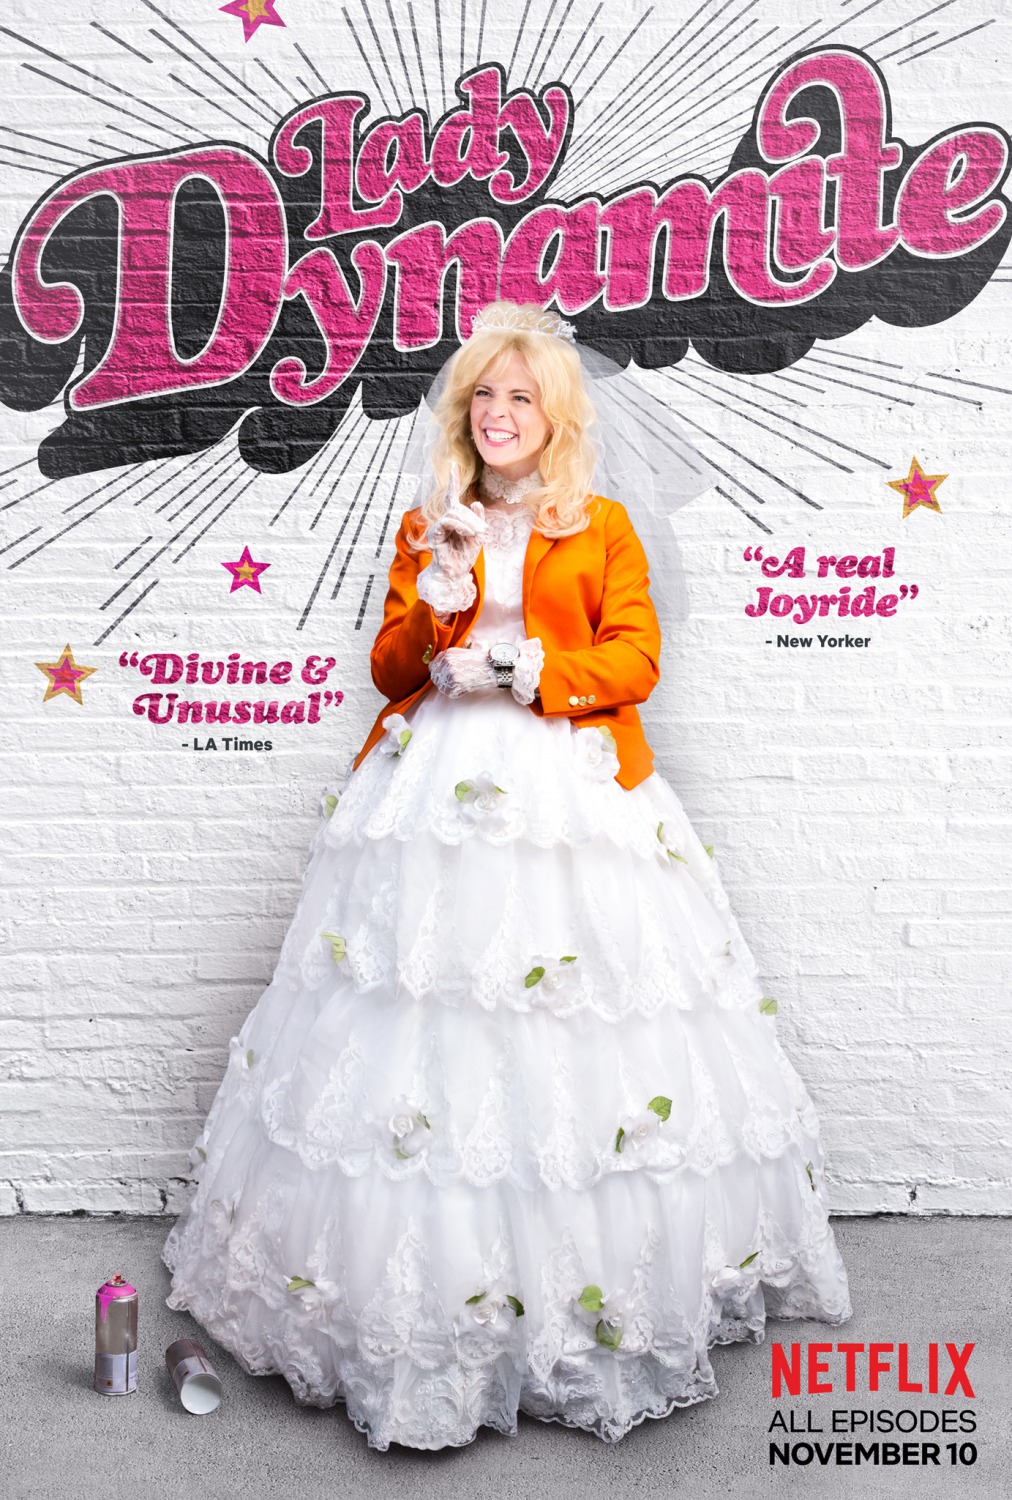 Extra Large TV Poster Image for Lady Dynamite (#2 of 2)